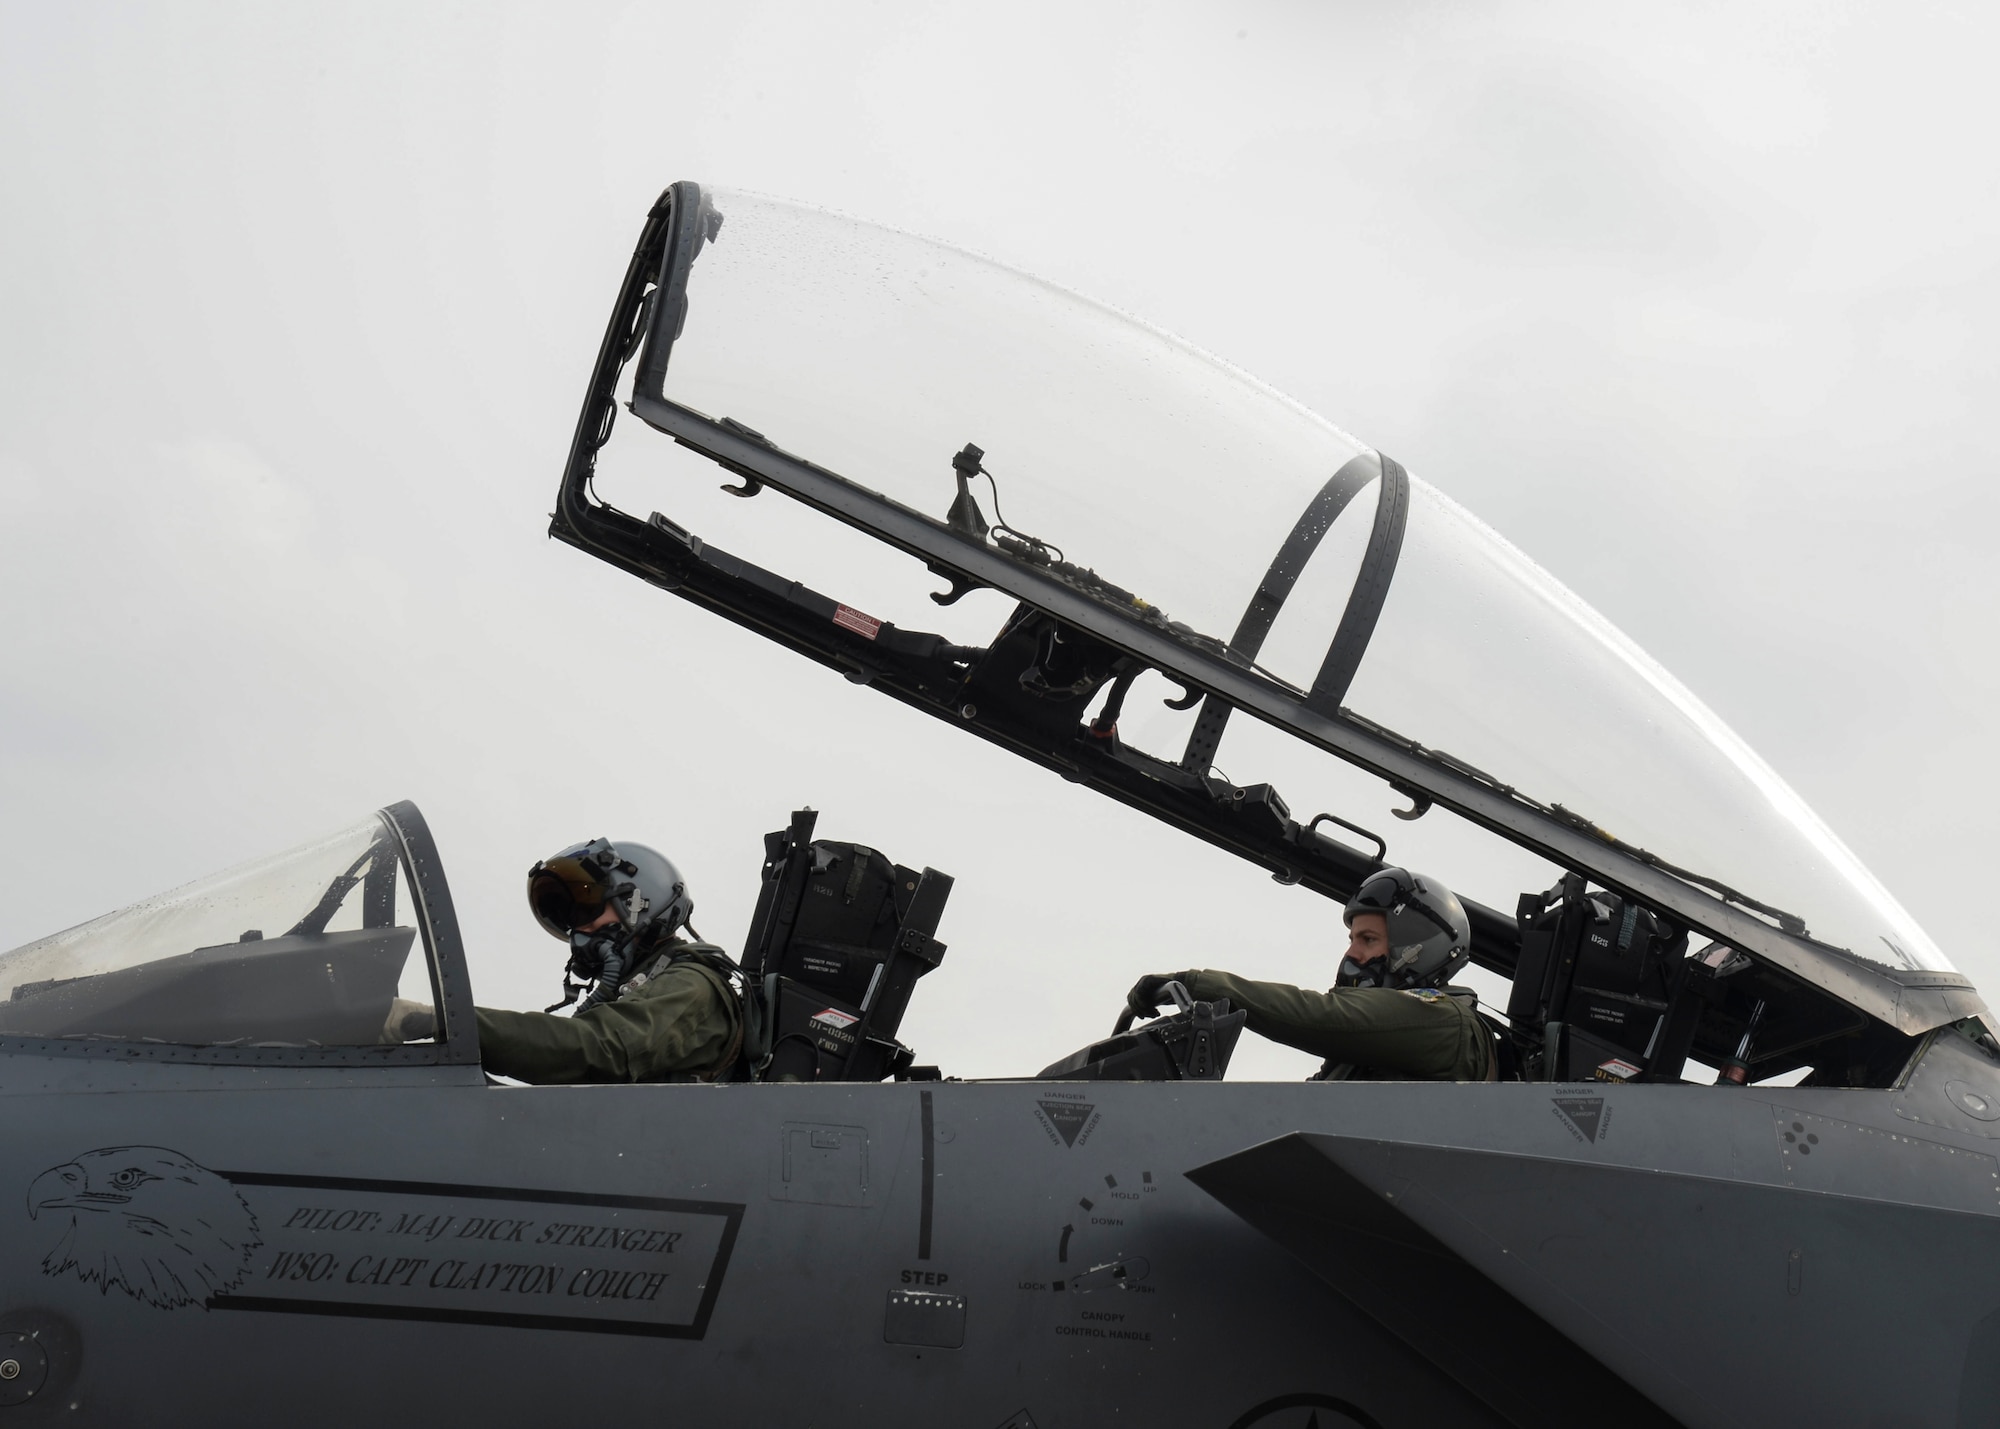 Capt. Derek Anderson, 494th Fighter Squadron pilot (left), and Maj. Reed Kastner, 494th Fighter Squadron weapons system officer, perform a preflight inspection on an F-15E Strike Eagle on the flightline at Royal Air Force Lakenheath, England, March, 28, 2014. The 494th FS is participating in Exercise Tonnerre Lightning, which is a series of training aimed at improving interoperability between the partner-nation air forces of the United Kingdom, France, and the United States. (U.S. Air Force photo by Airman 1st Class Nigel Sandridge) 
 
